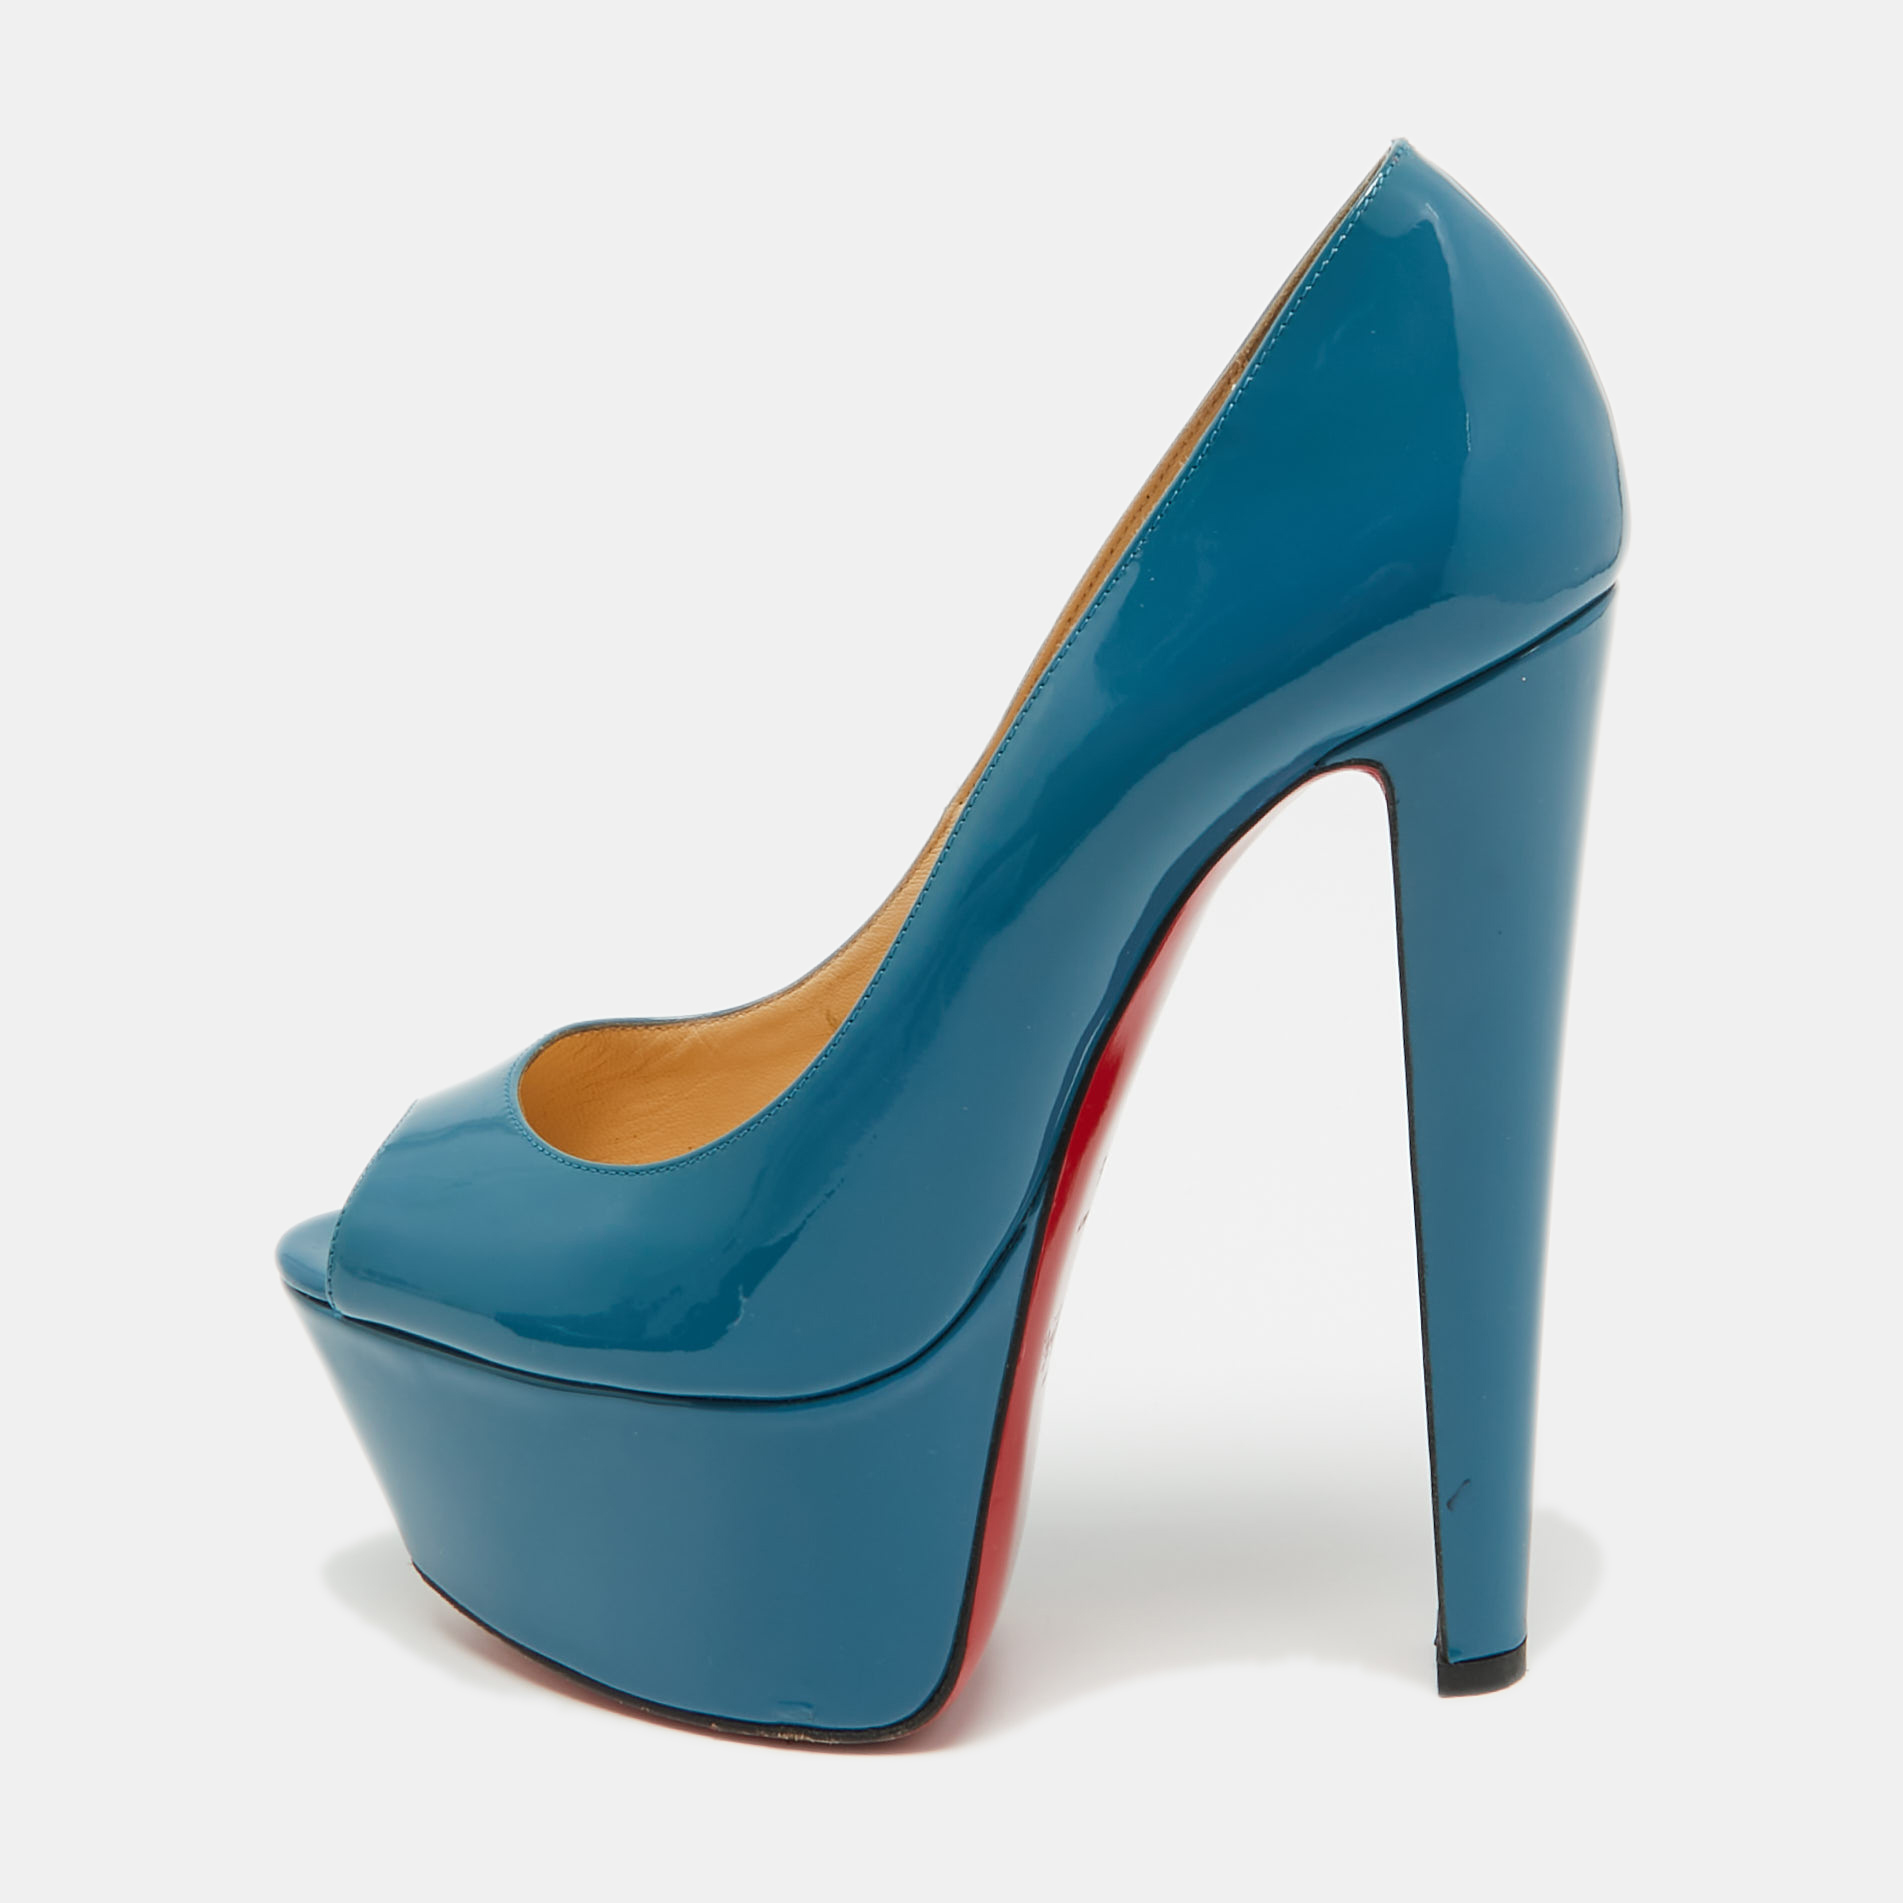 Pre-owned Christian Louboutin Blue Patent Leather Altareva Pumps Size 38.5